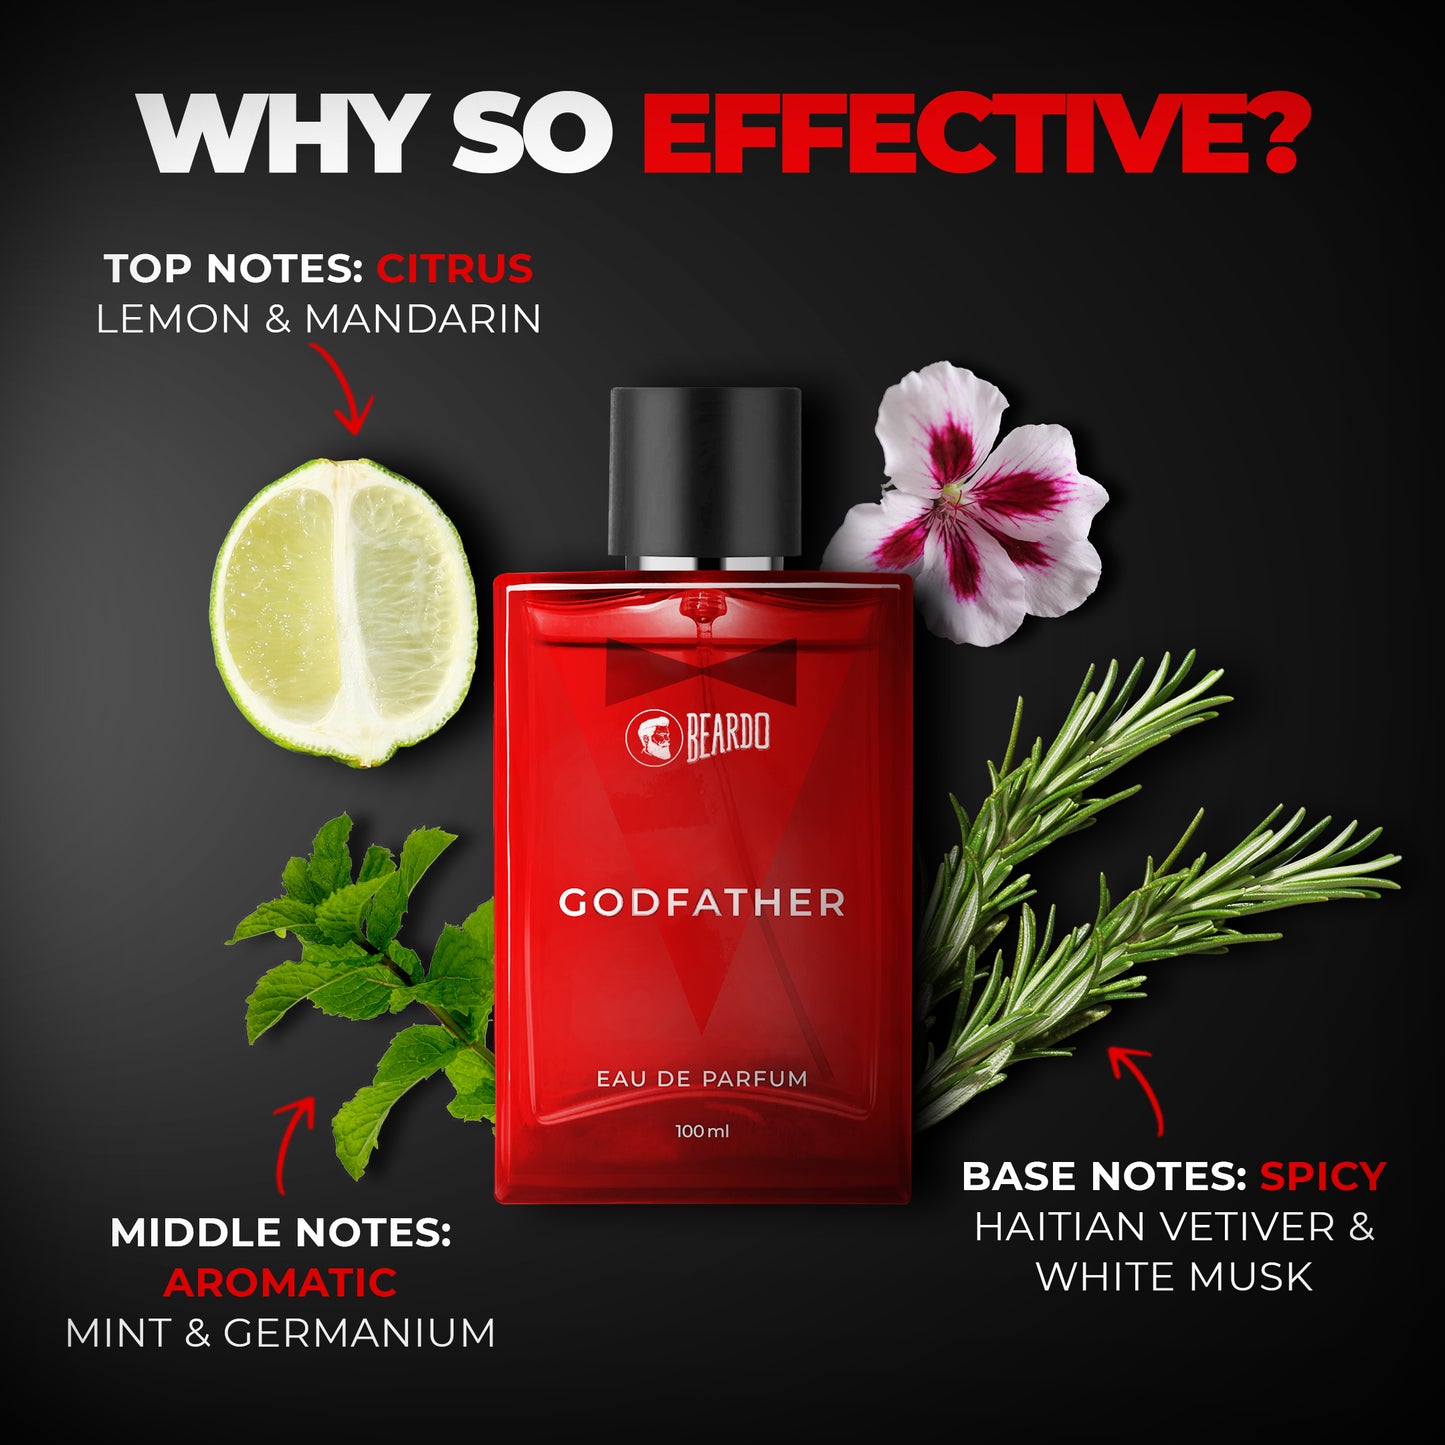 spicy notes, mandarin notes, white musk